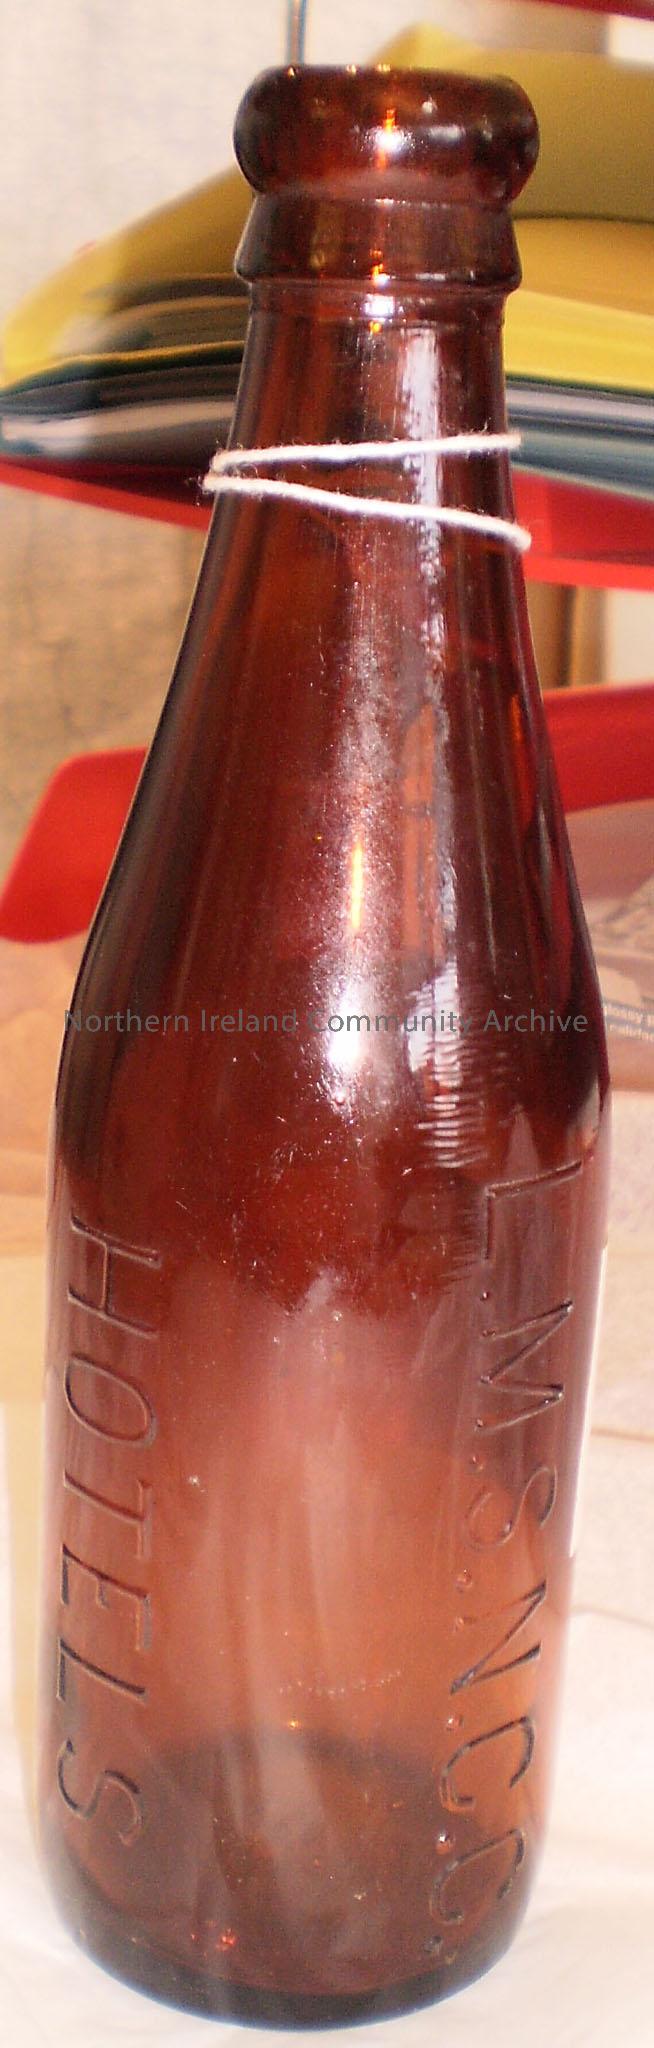 Brown glass bottle. Imprinted on the side is ‘L.M.S N.C.C Hotels’. This refers to London Midland and Scottish Railway, Northern Counties Committee and…